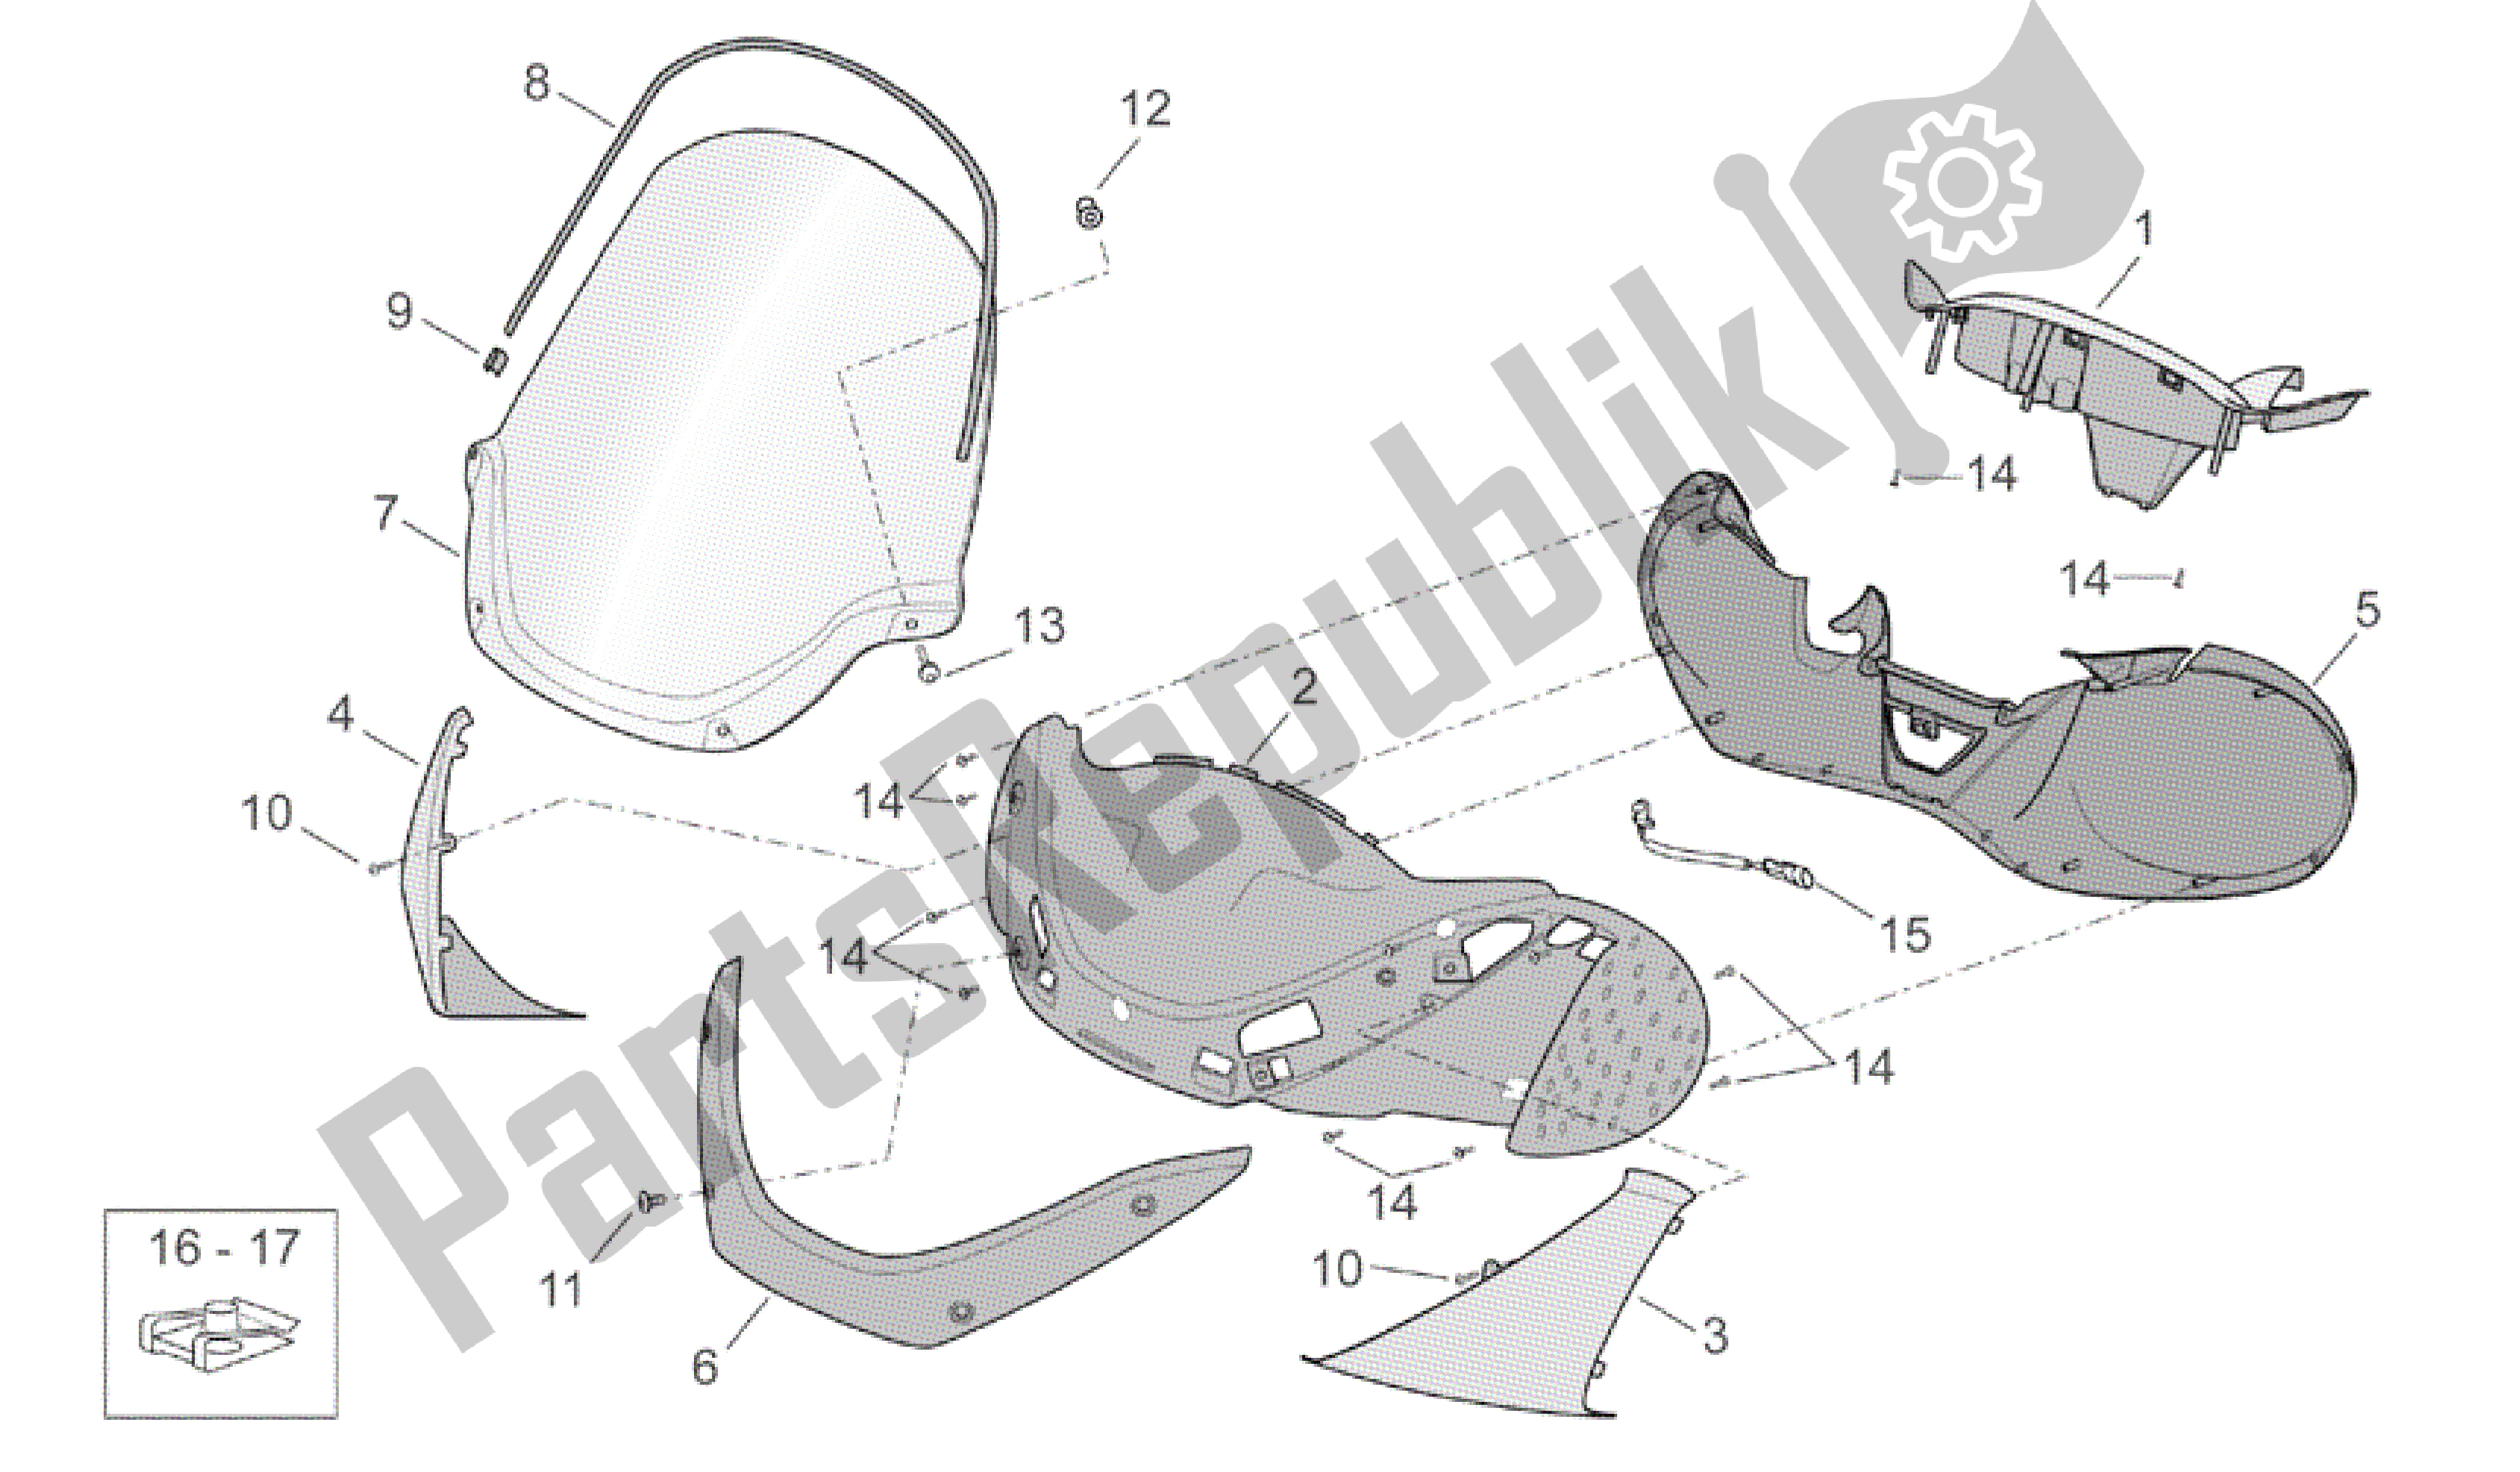 All parts for the Front Body I of the Aprilia Scarabeo 500 2003 - 2006